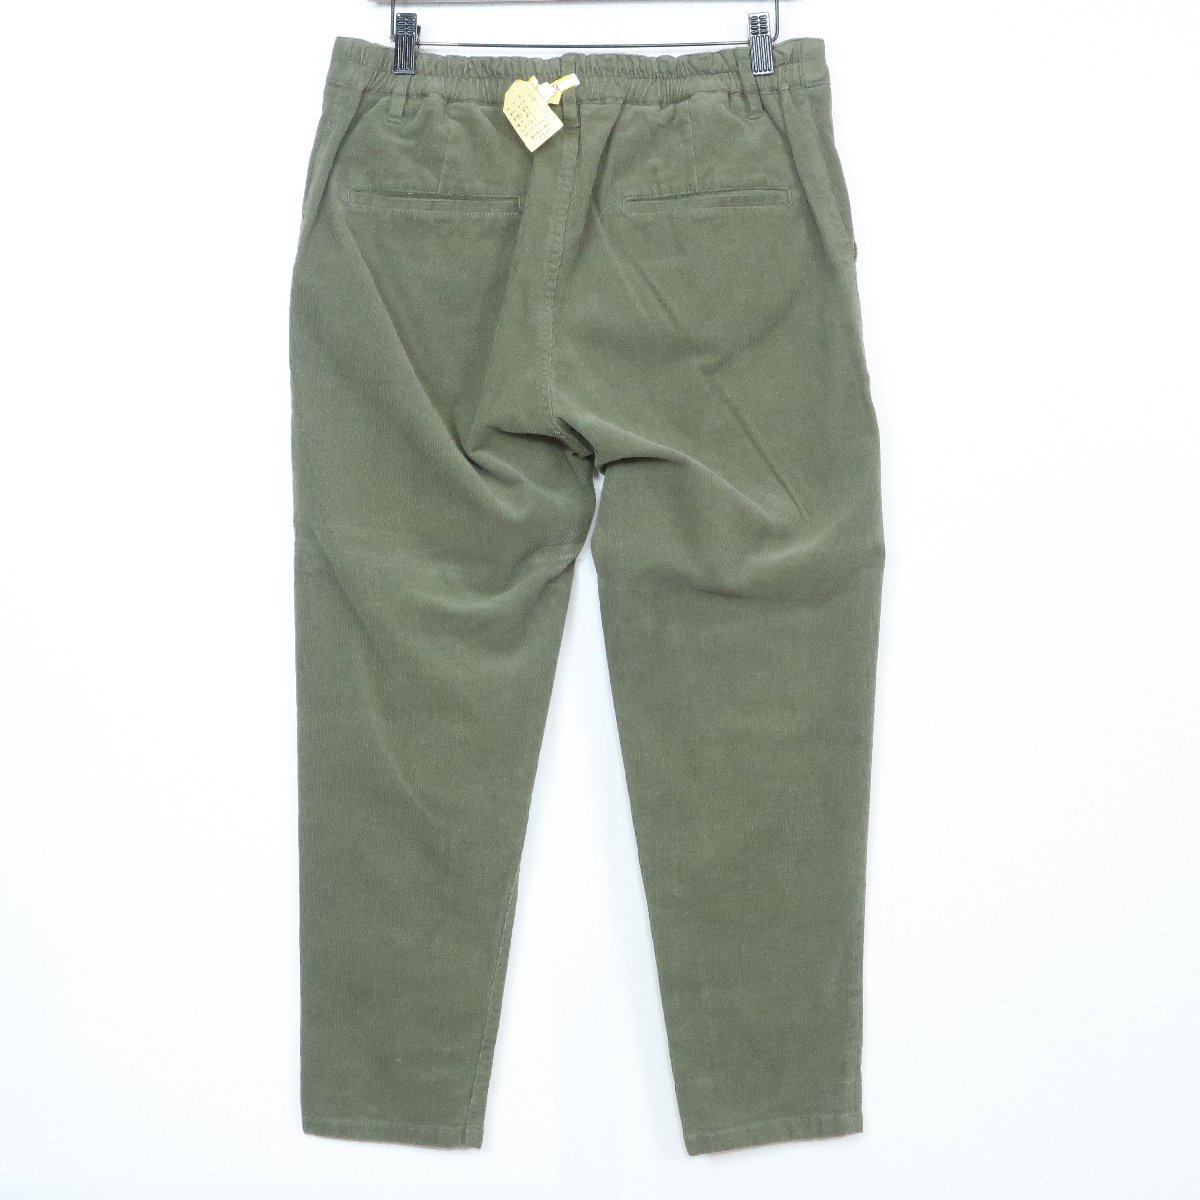  As Know As o Ora ka* long pants corduroy material large size 13 stretch material & waist rear rubber . easily! moss green series z960